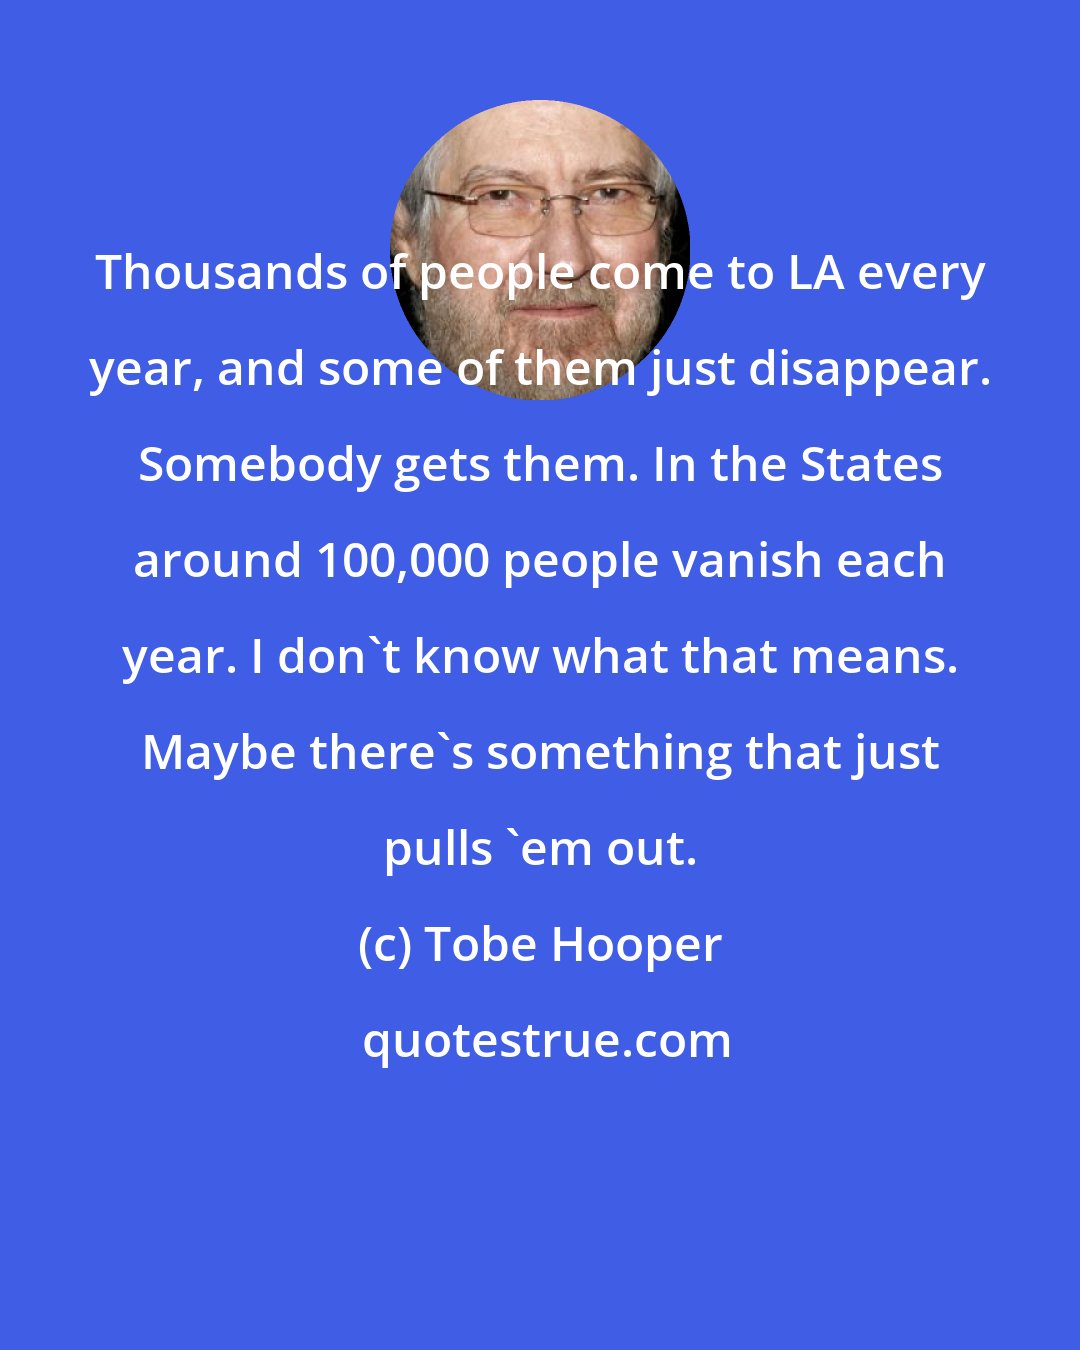 Tobe Hooper: Thousands of people come to LA every year, and some of them just disappear. Somebody gets them. In the States around 100,000 people vanish each year. I don't know what that means. Maybe there's something that just pulls 'em out.